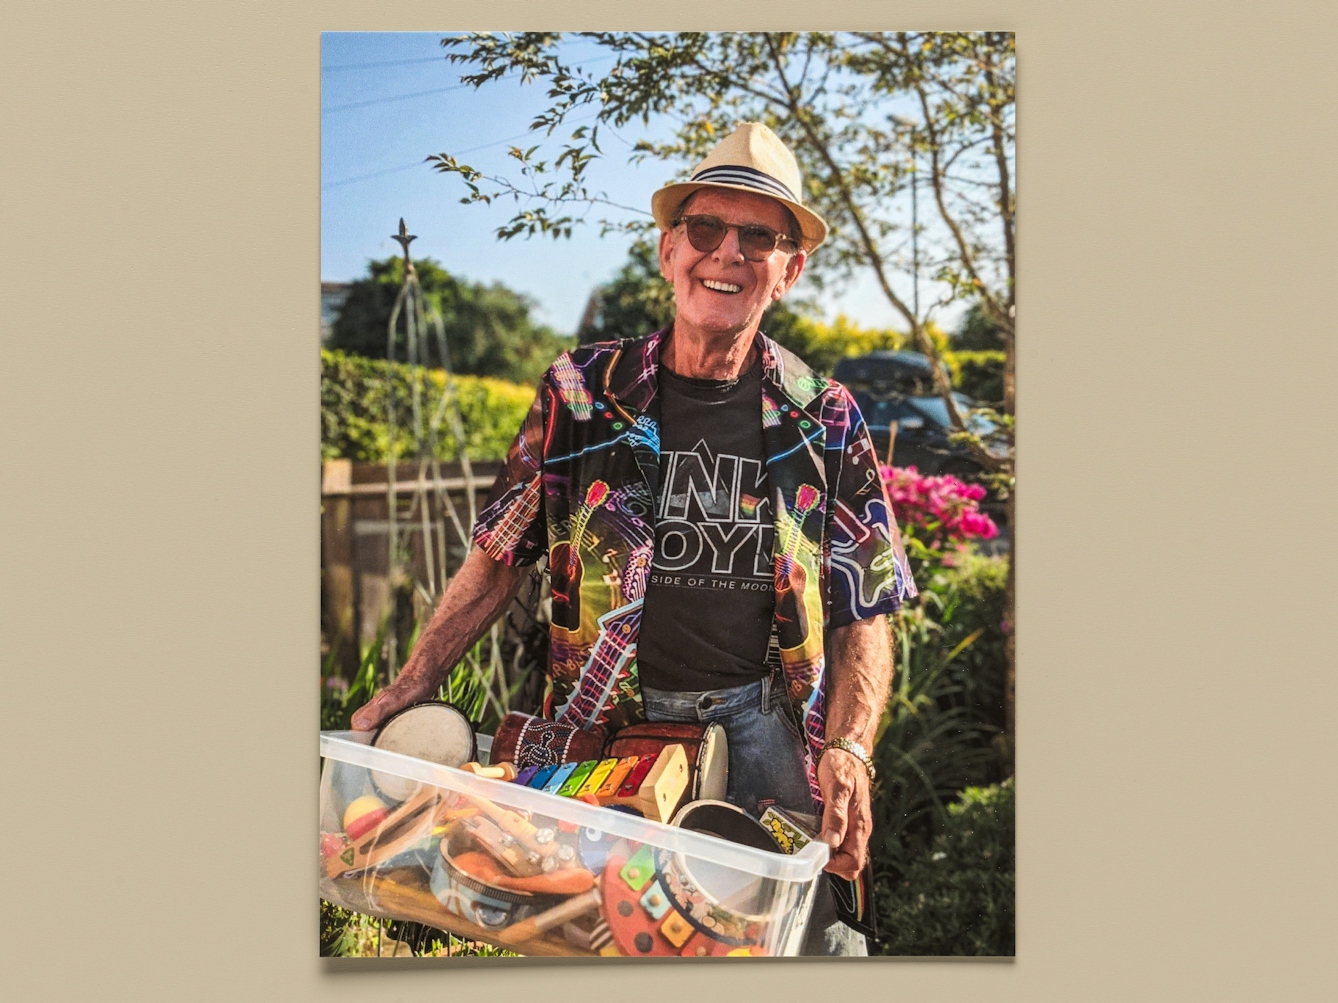 Photograph of a print of a colour photo resting on a light taupe-coloured background. The photo shows an older man standing in a garden scene bathed in the sunshine, smiling to camera. He is wearing sunglasses, a trilby hat, and a brightly coloured, patterned, short-sleeved shirt. He is carrying a plastic storage box full of musical instruments, drums, tambourines, xylophones and shakers.